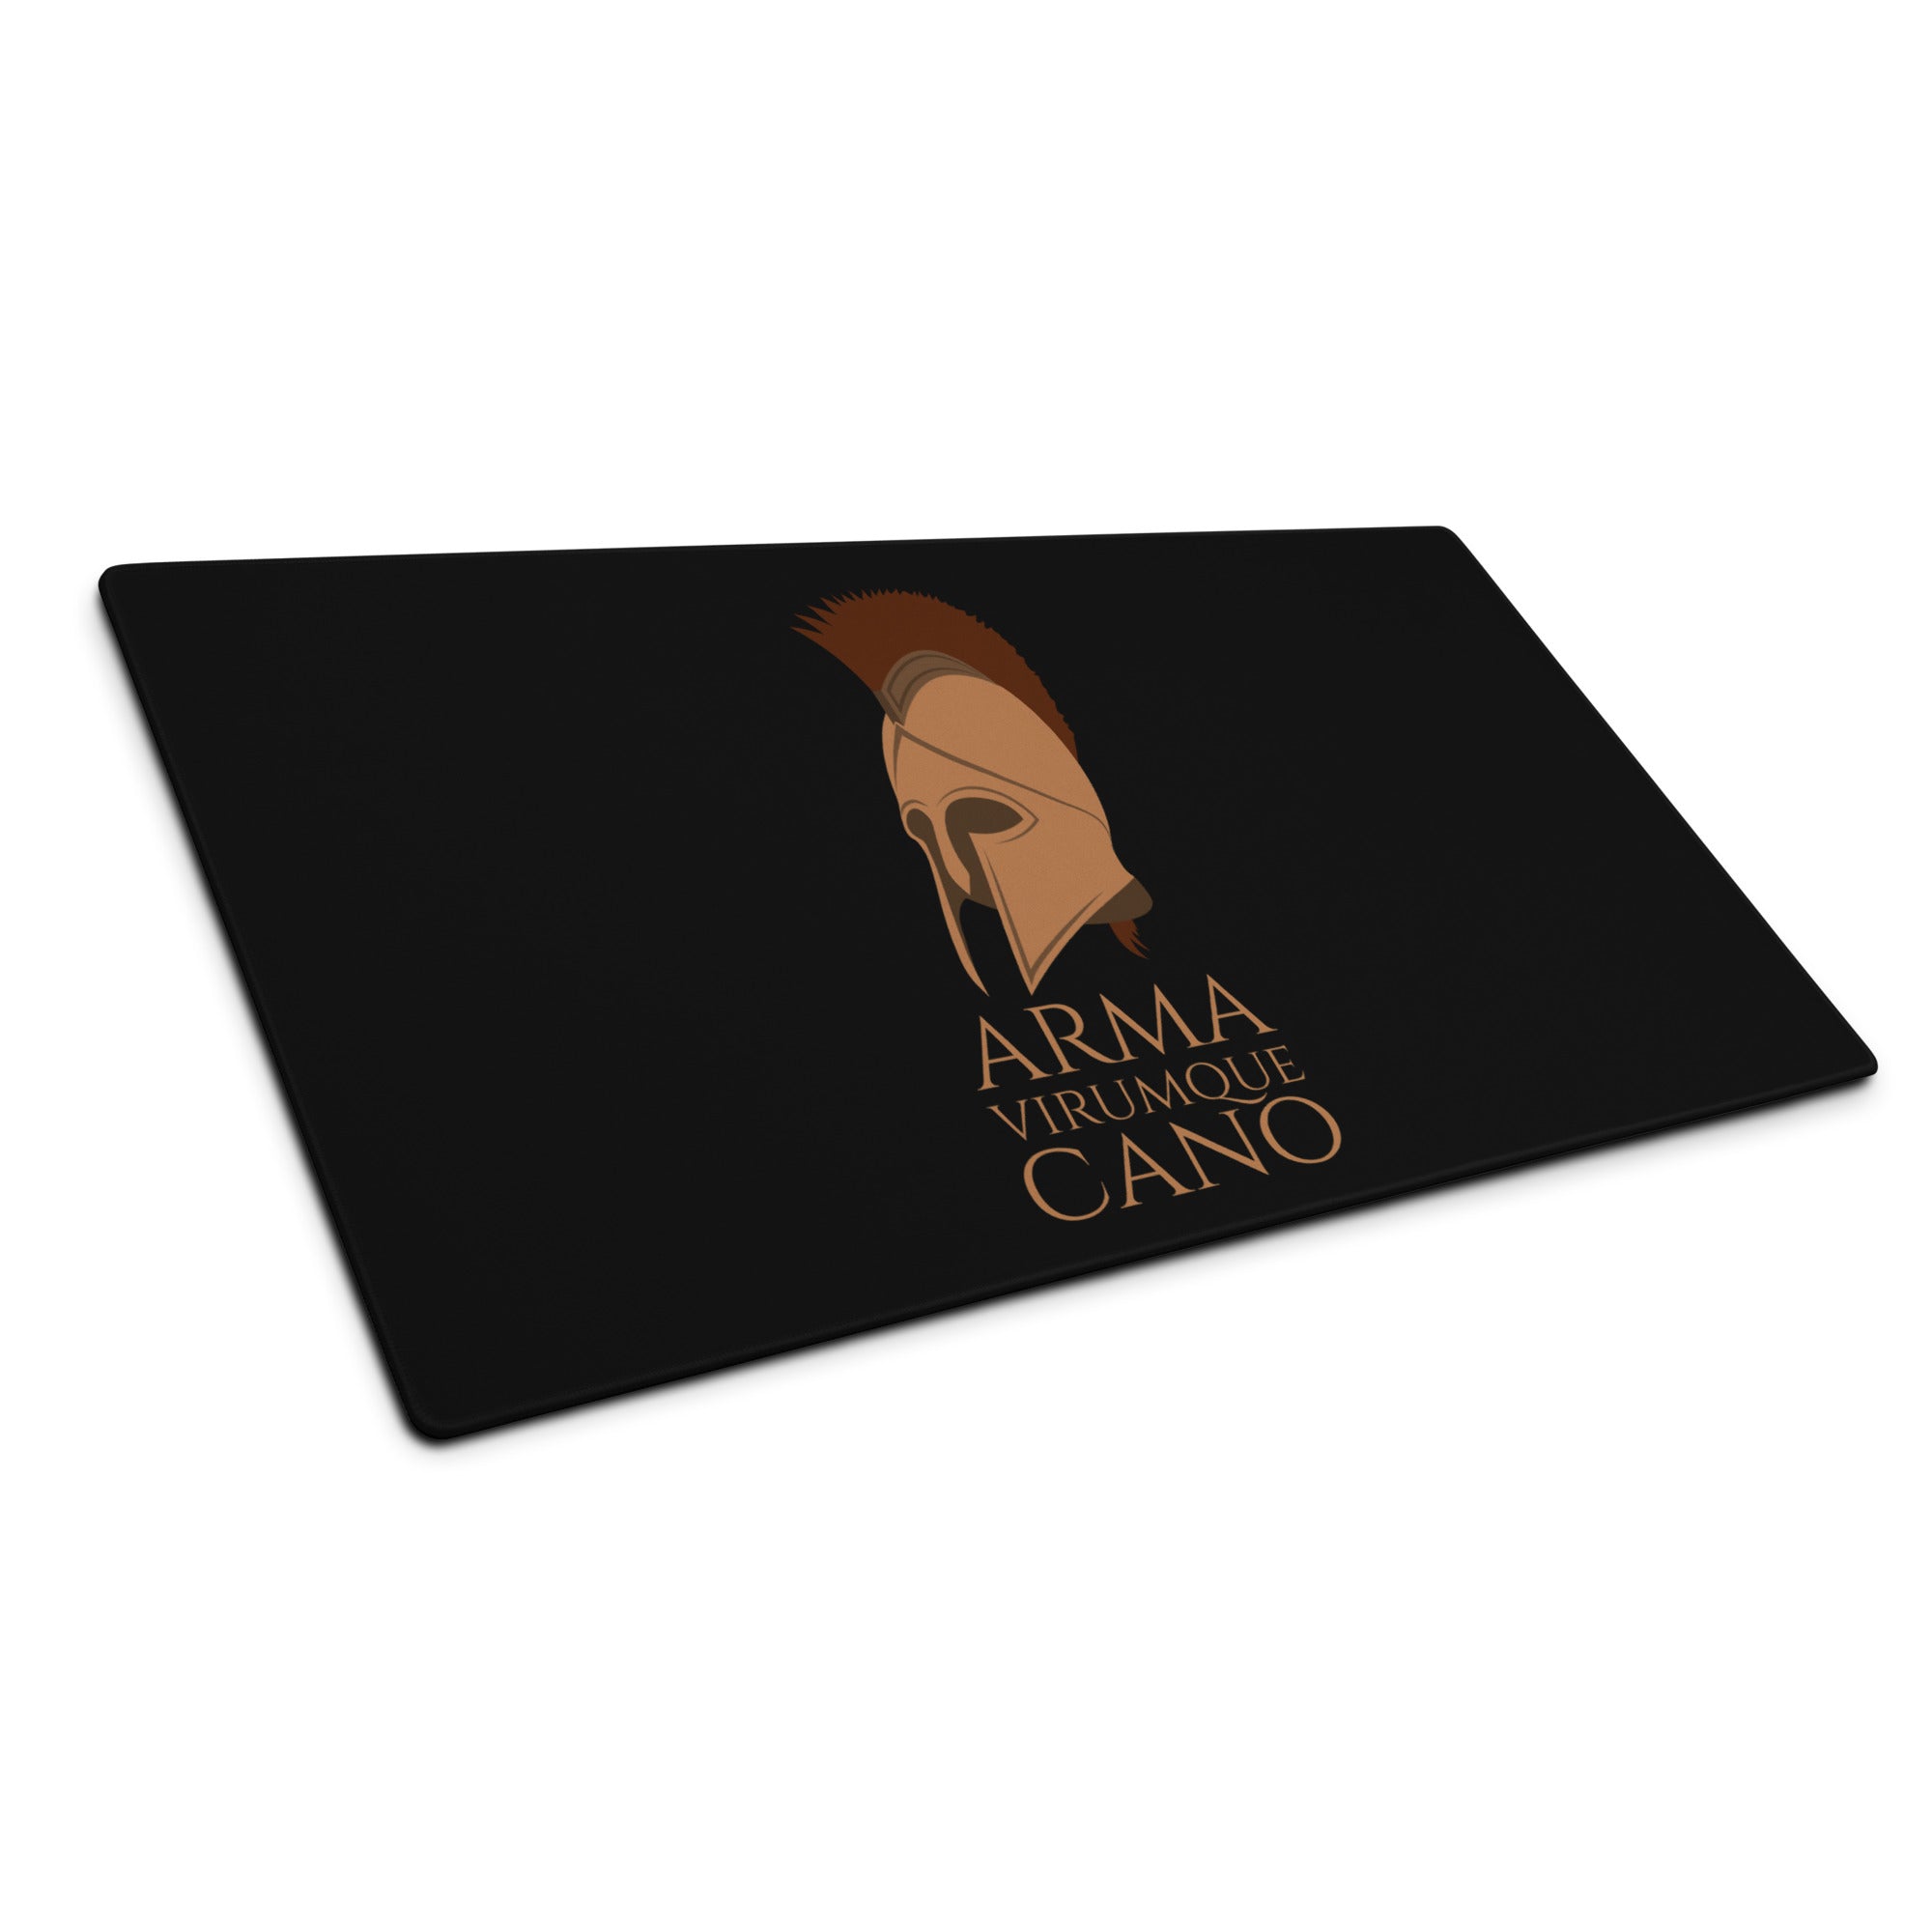 Arma Virumque Cano - I Sing Of Arms And The Man - The Aeneid Roman Mythology - Gaming Mouse Pad